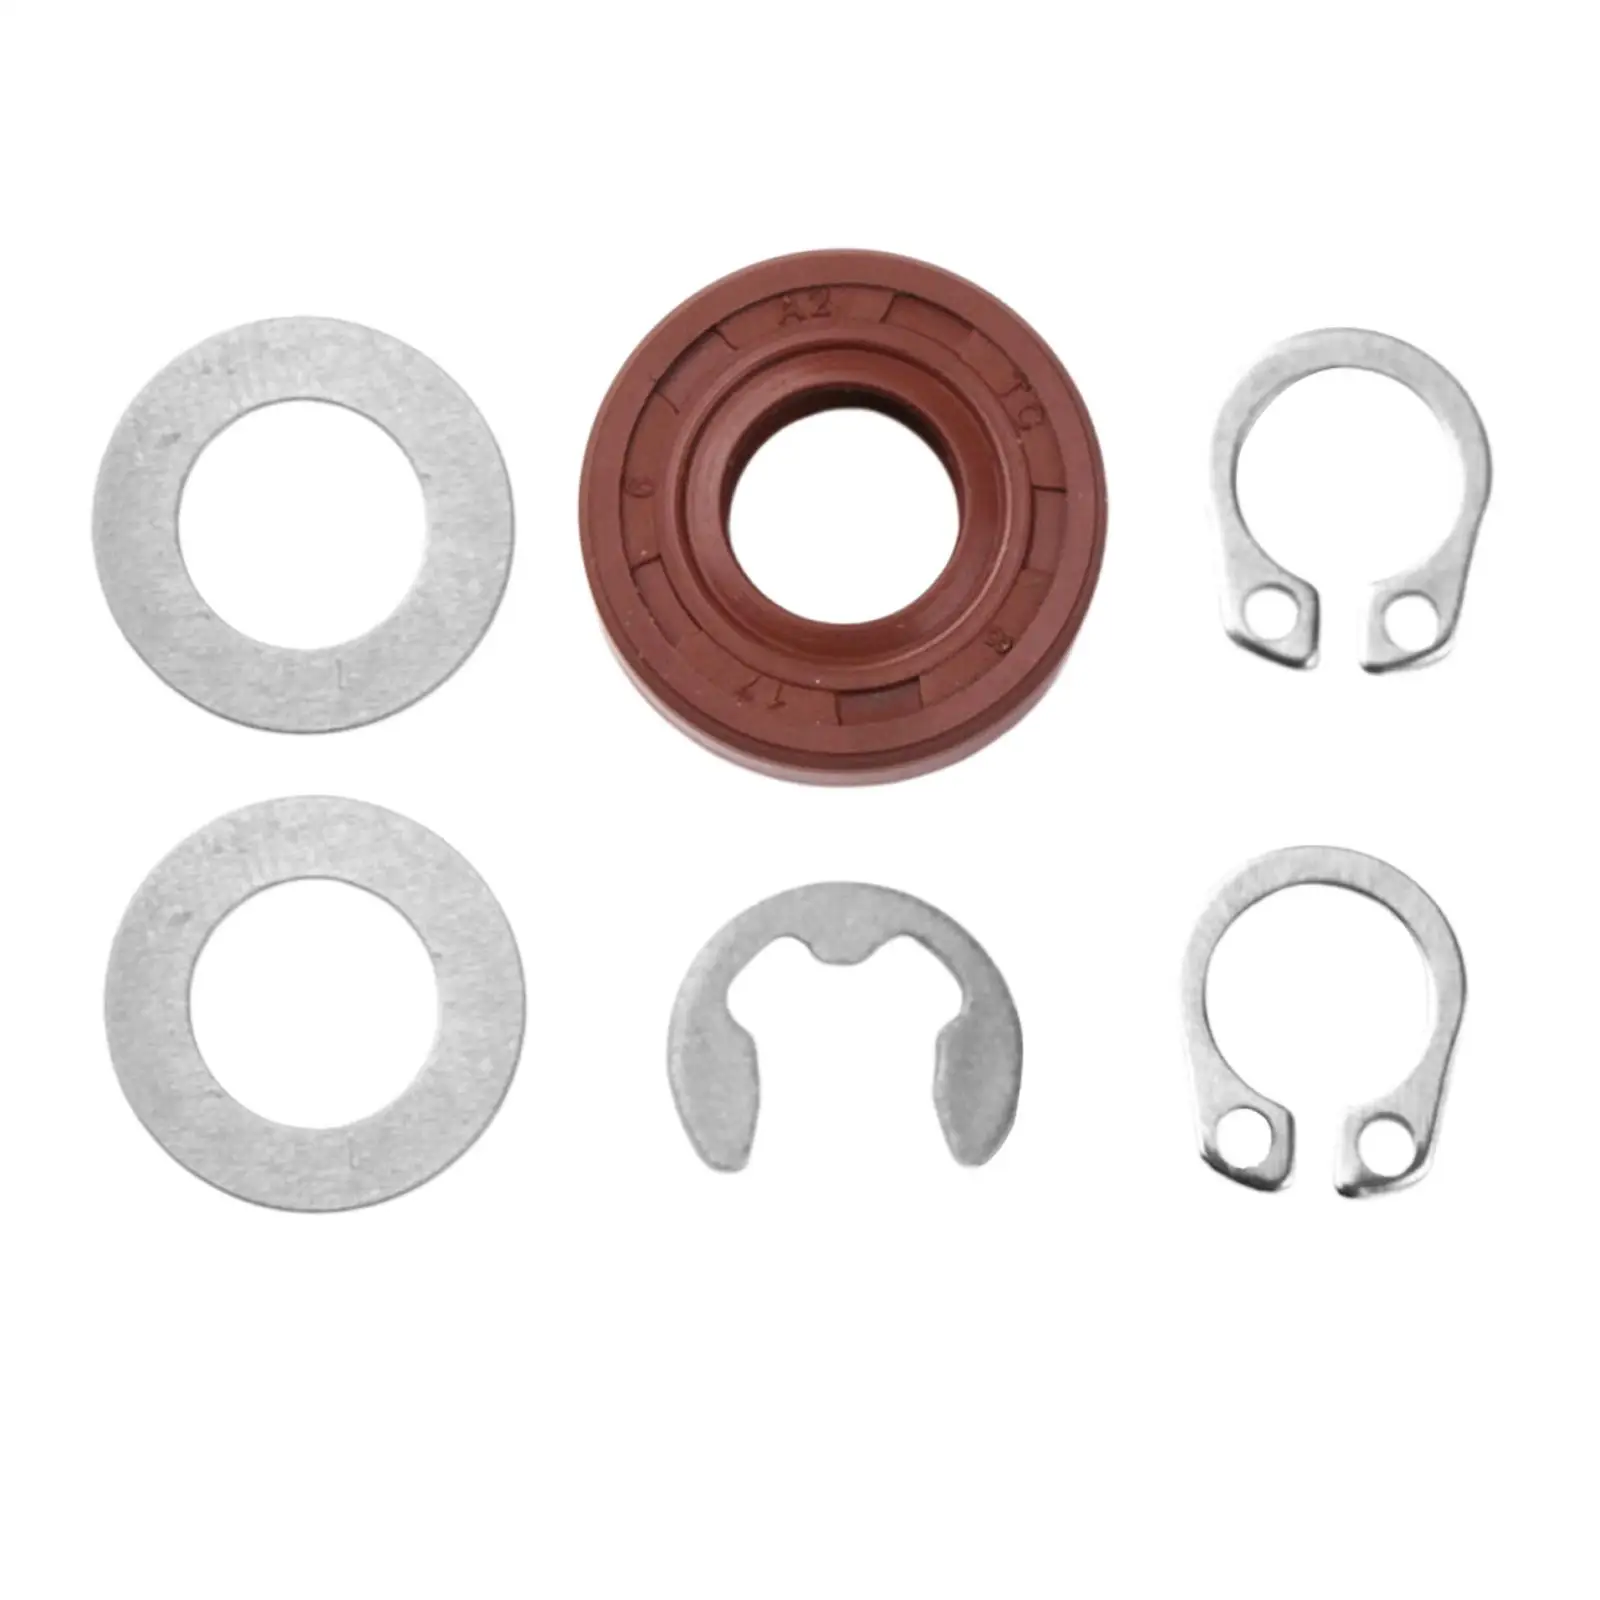 Professional Bread Maker Replacement Parts Breadmaker Repair Parts Durable Easy to Install 50mm Bread Maker Seal set for Cbk-100